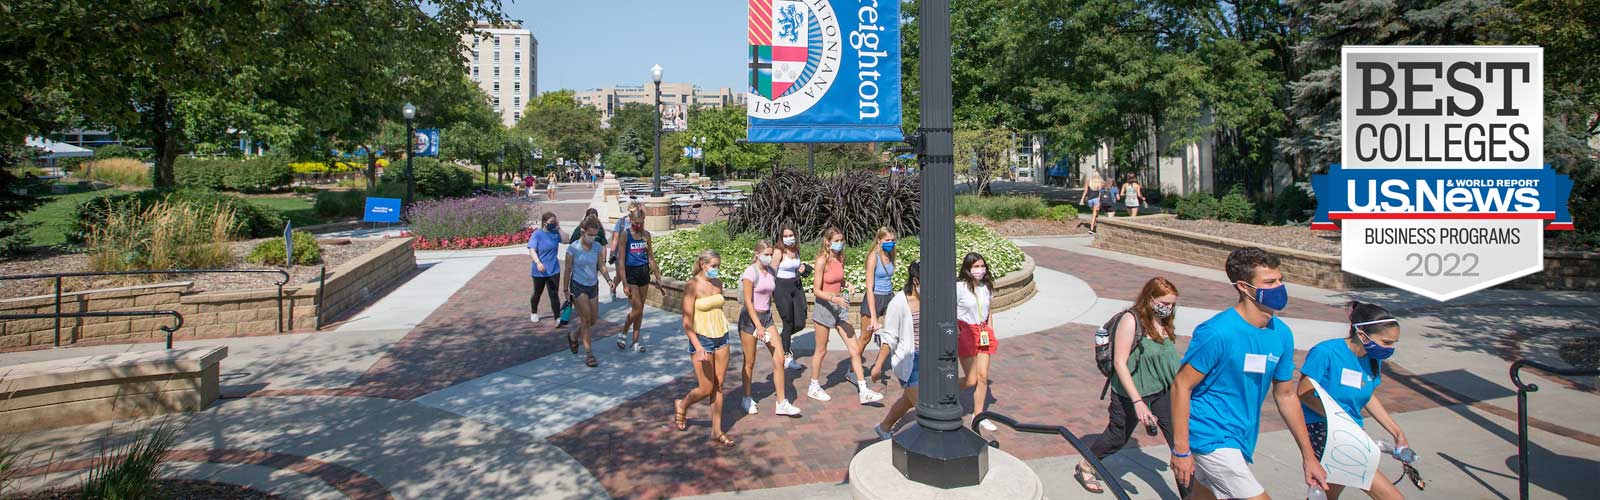 Students walking across campus with the U.S. News & World Report Best Colleges - Business Programs 2022 badge overlaid